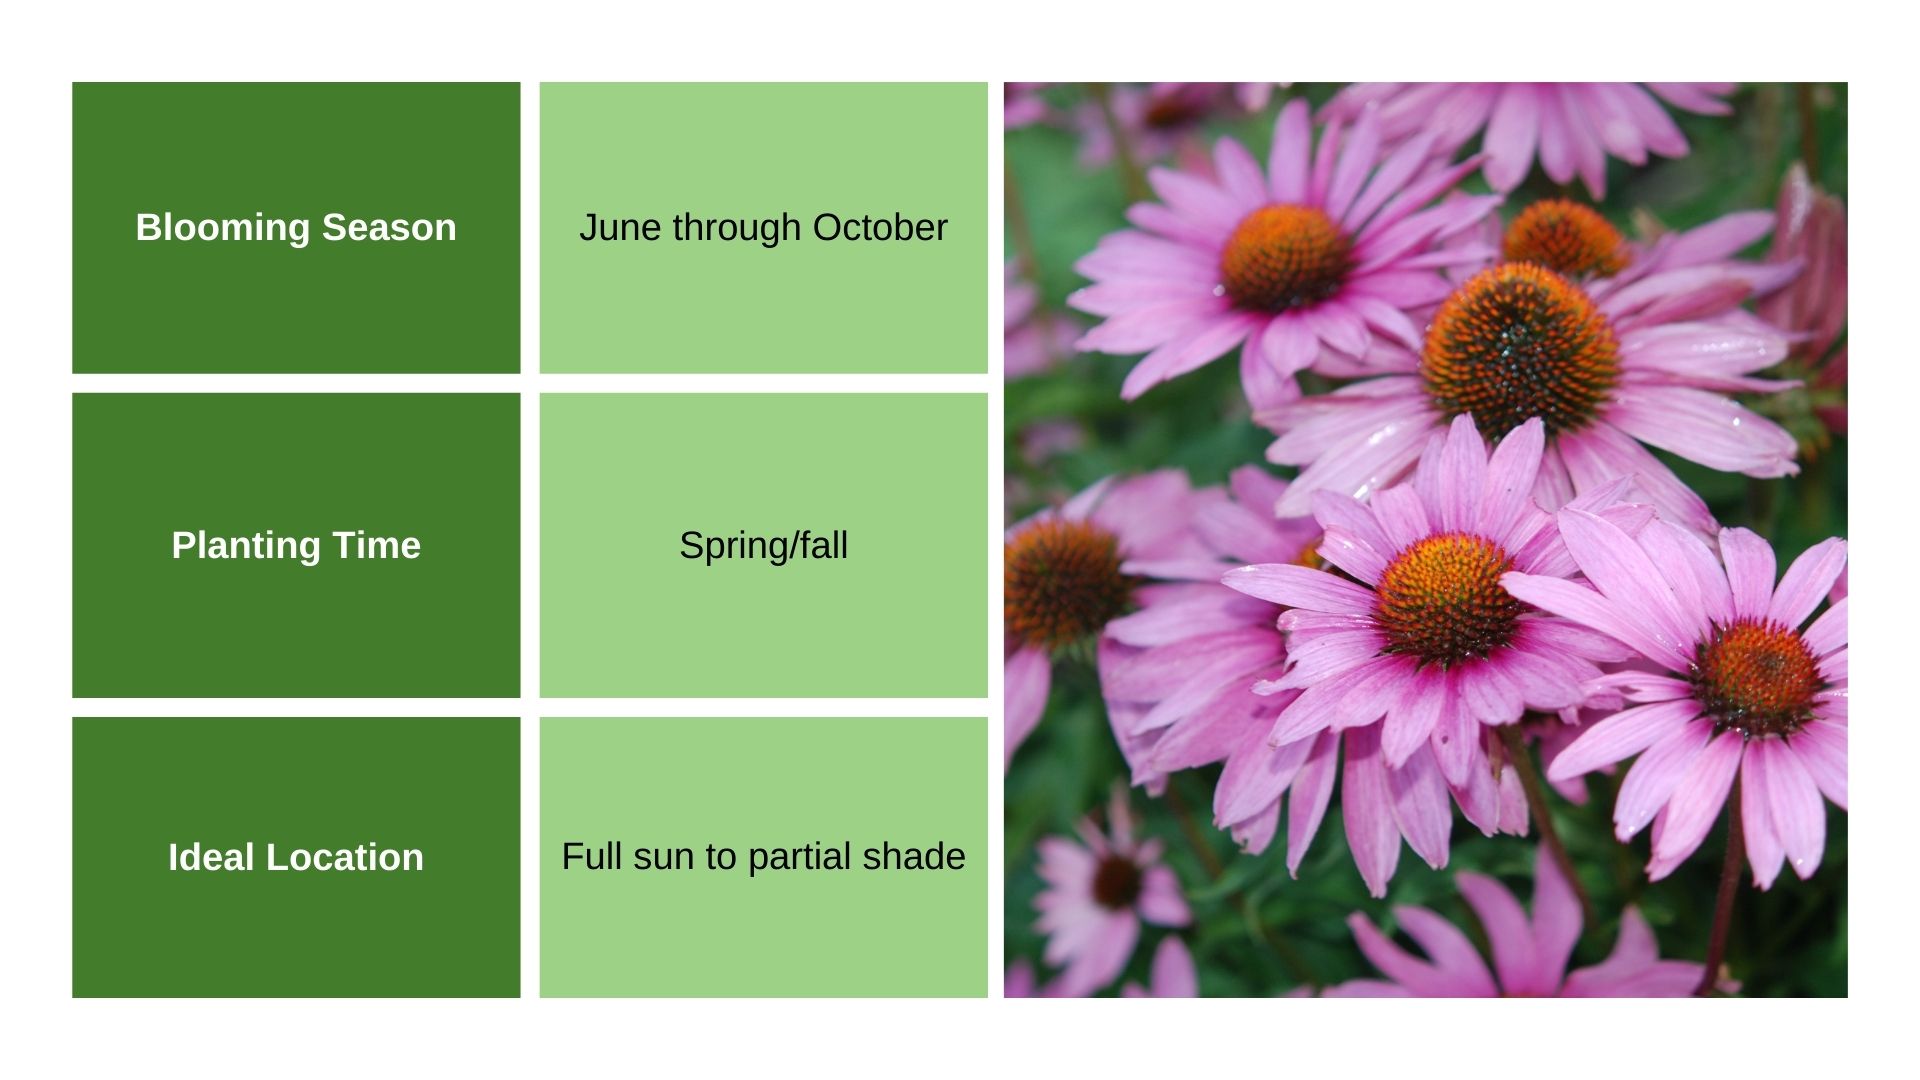 Coneflower info chart and plant photo